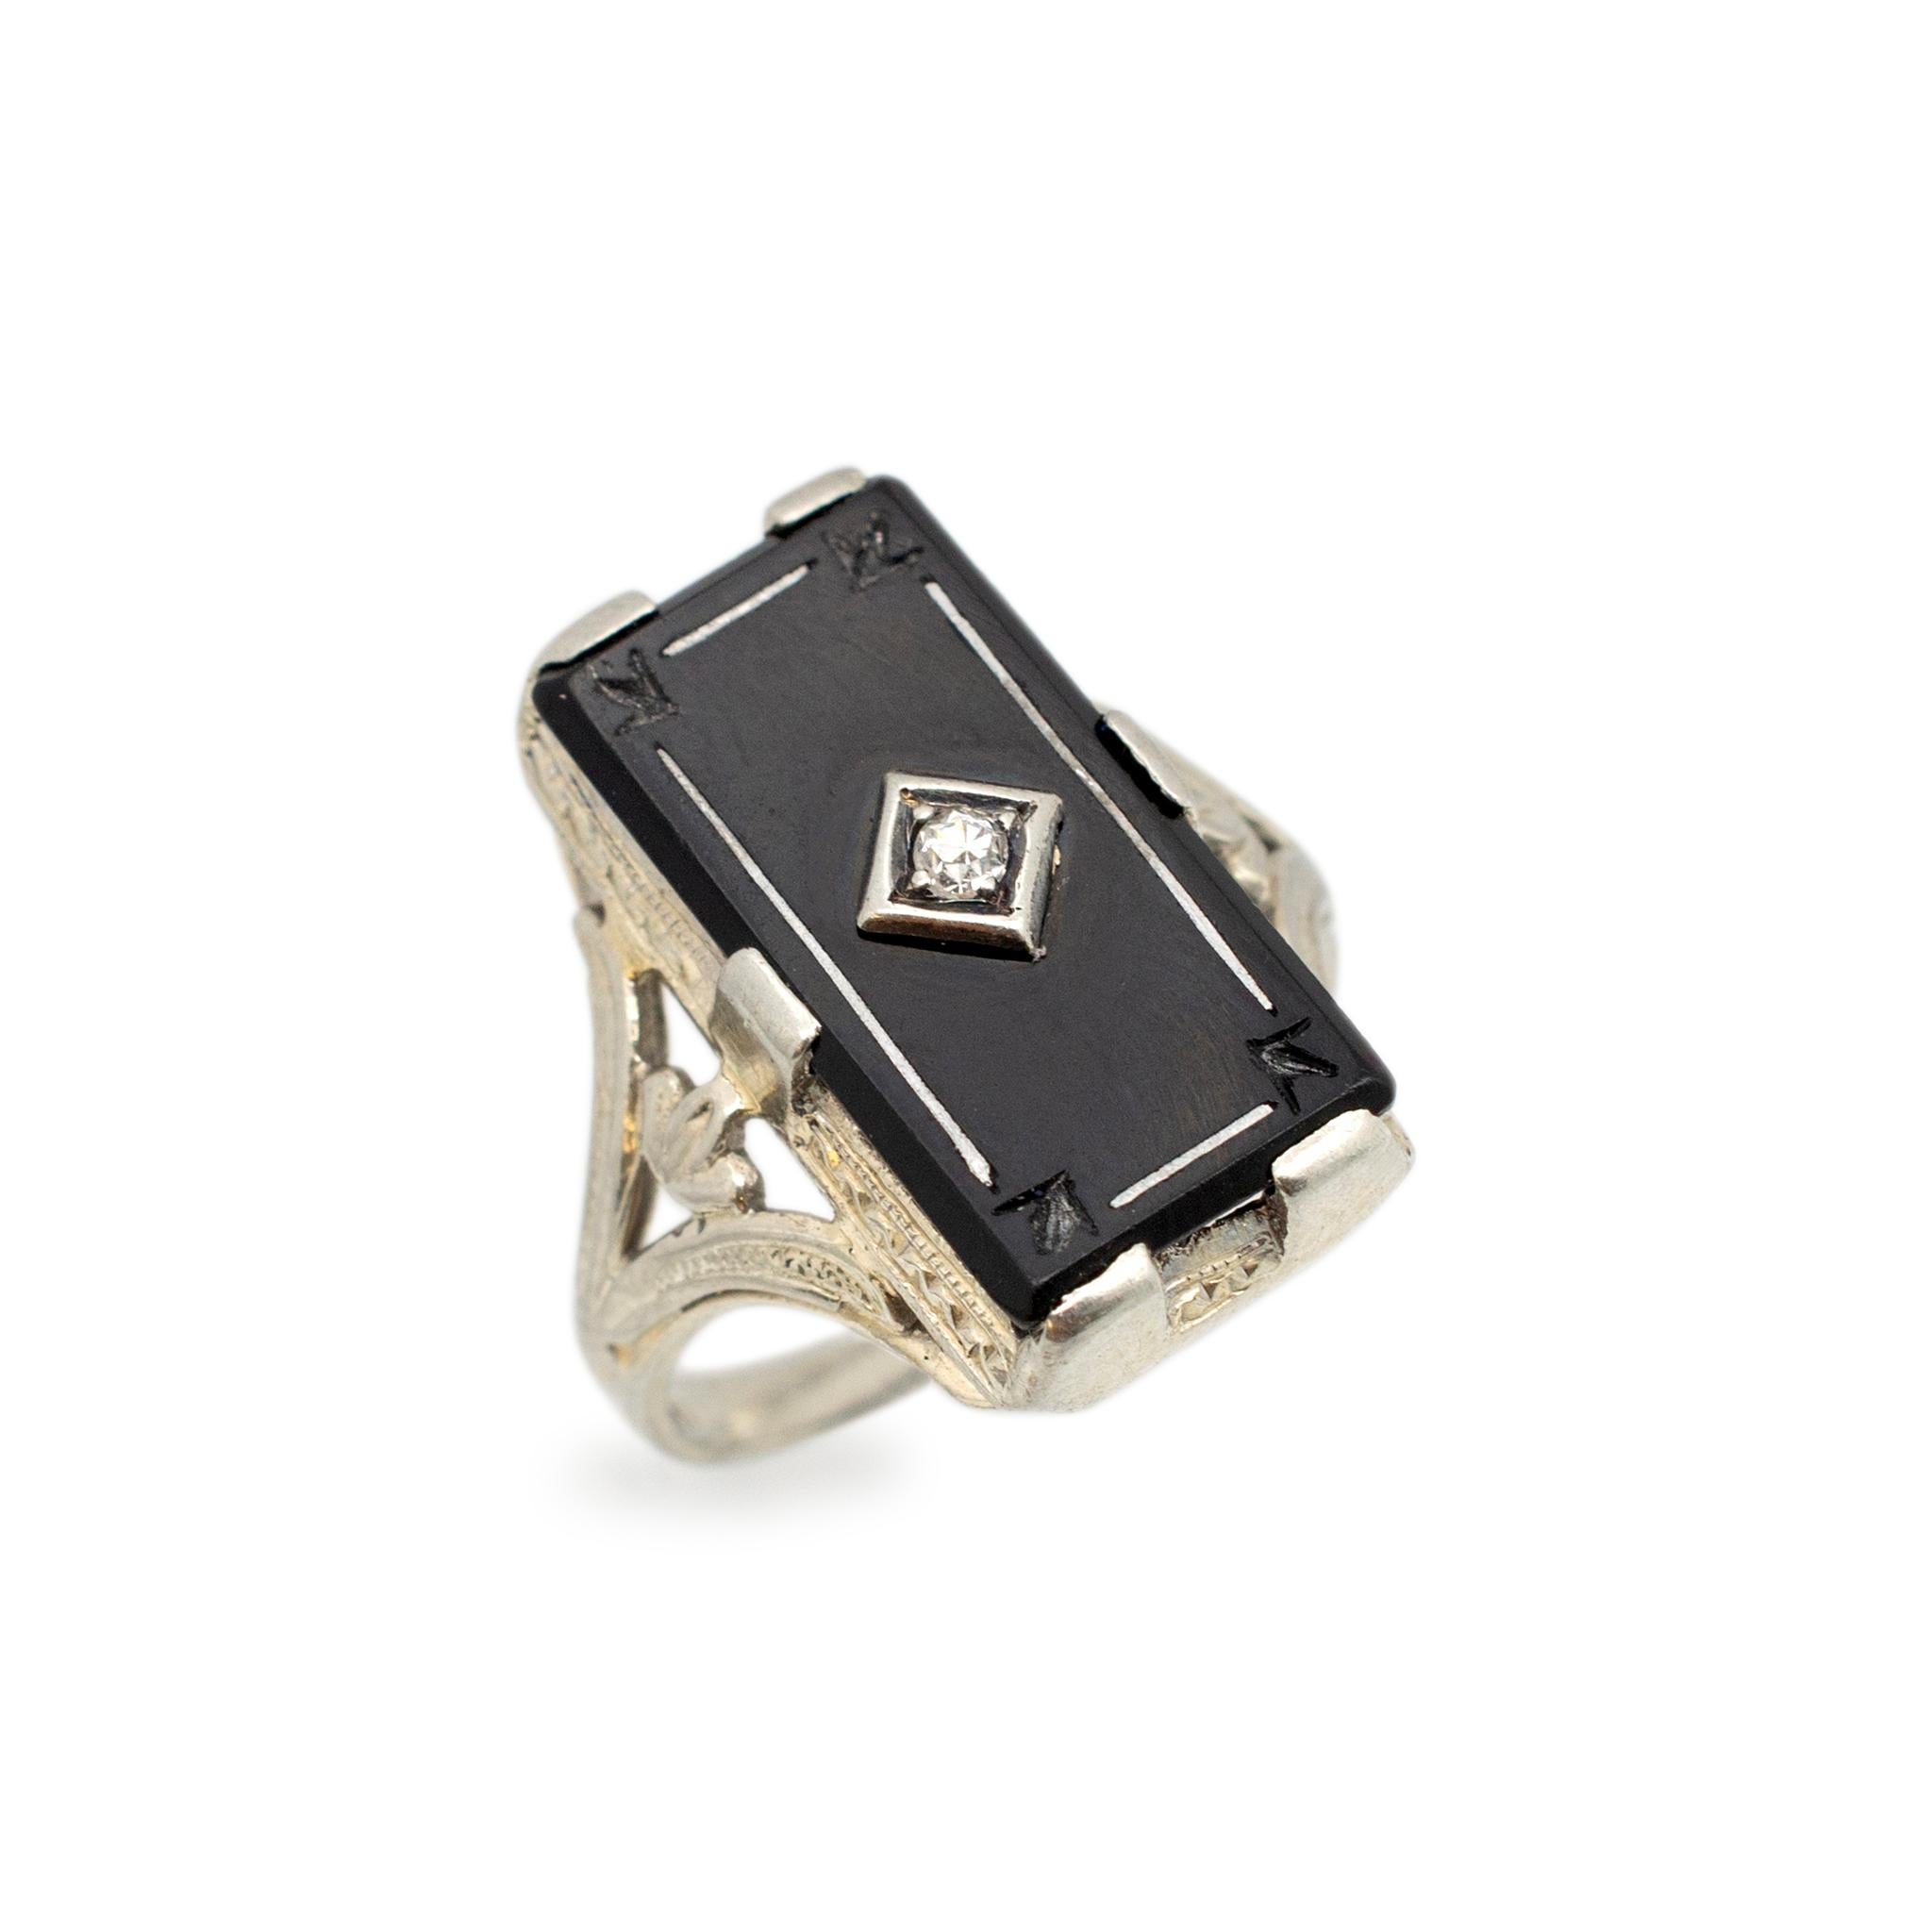 Gender: Ladies

Metal Type: 18K White Gold

Size: 5

Shank Maximum Width: 1.85 mm

Weight: 4.54 grams

Ladies 18K white gold diamond and onyx antique cocktail ring with a split euro-shank. Engraved with 